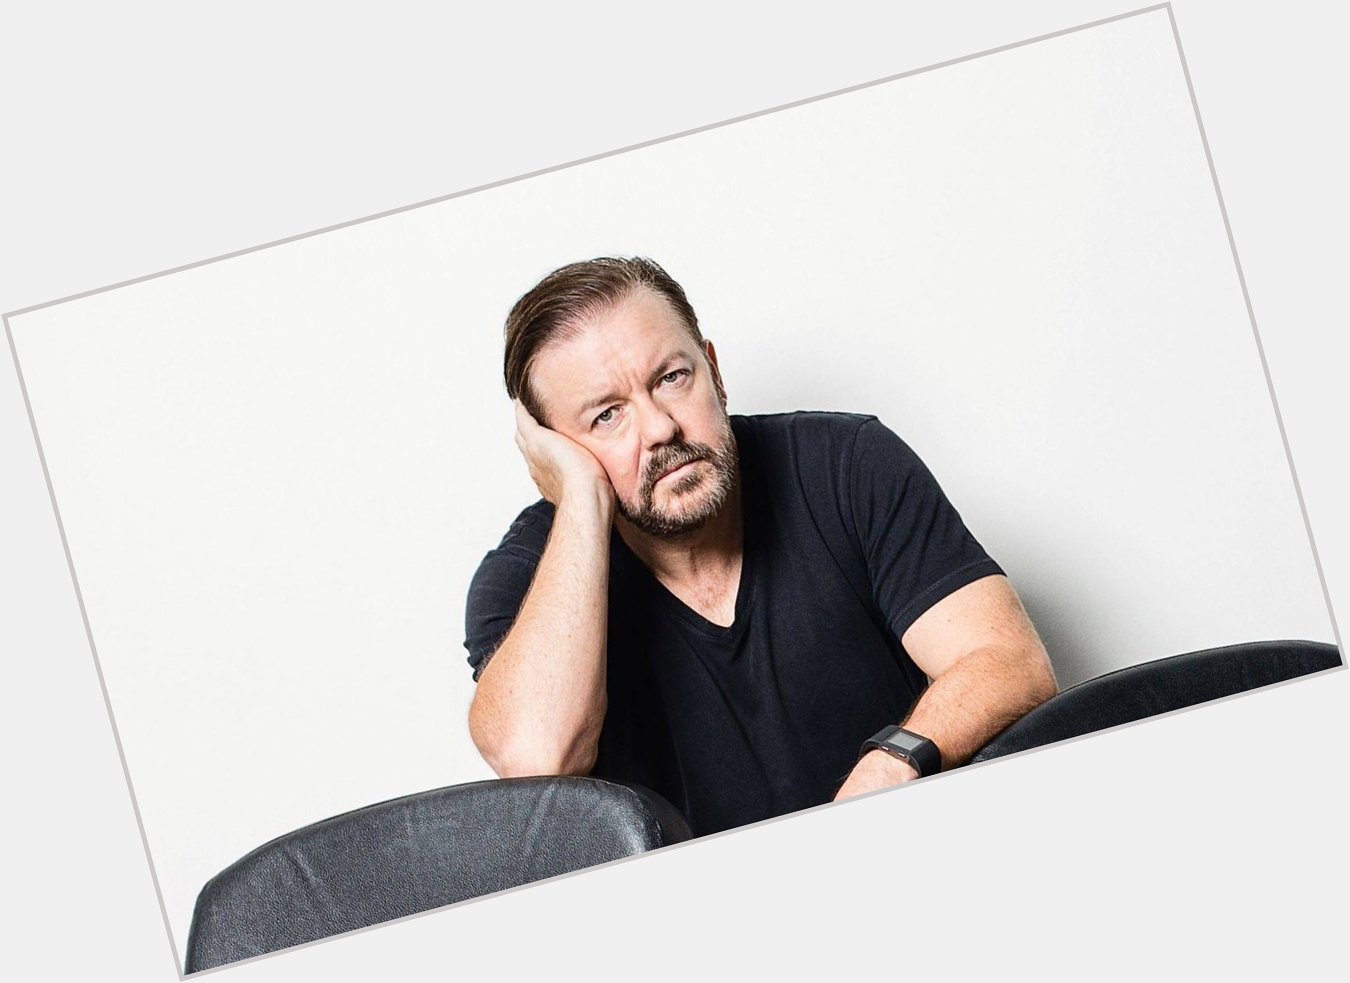 Happy Birthday to Ricky Gervais who turns 58 today! 